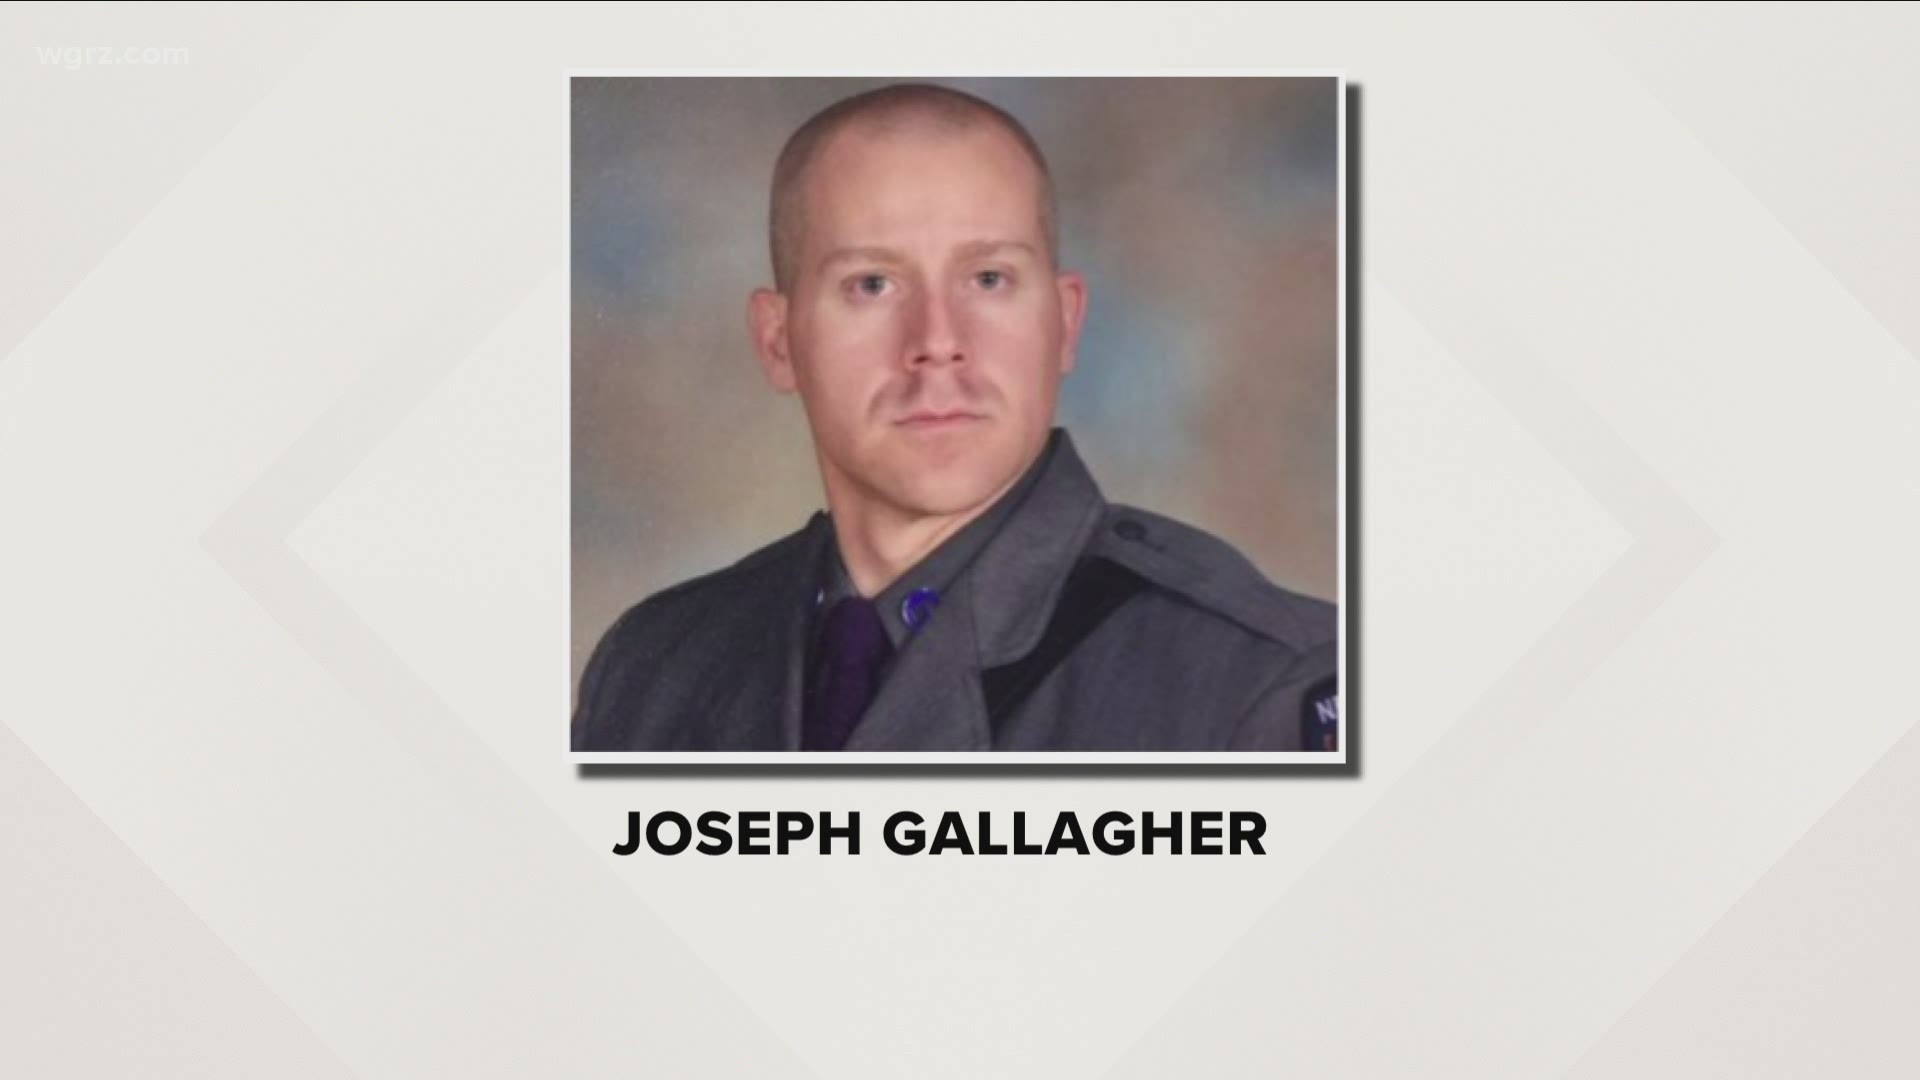 Trooper Joseph Gallagher was hit by a vehicle in December 2017 when he stopped to help another driver who had broken down.